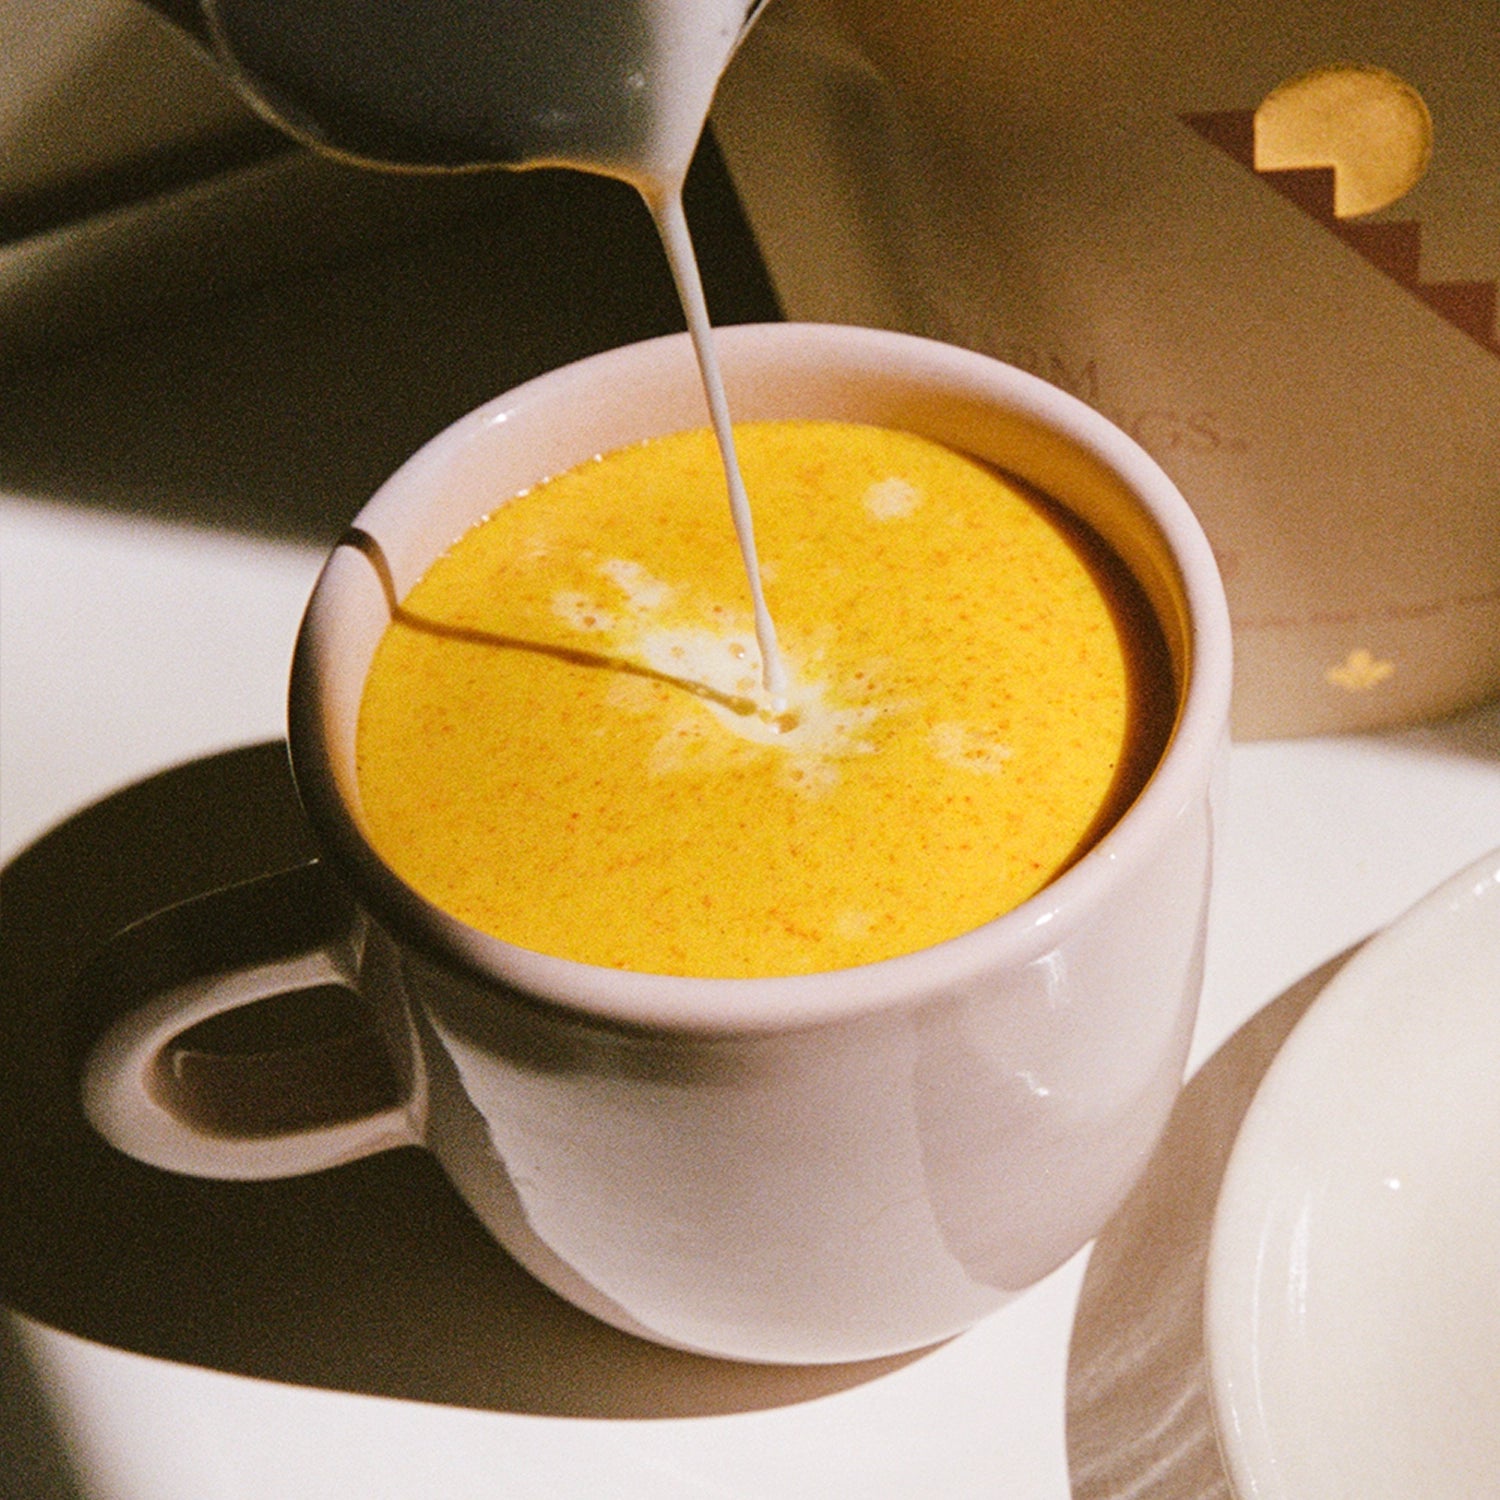 A white mug filled to the brim with a vibrant, saffron-colored frothy drink, as a stream of milk is being poured in, creating a delicate pattern on the surface. The mug sits next to a saucer.